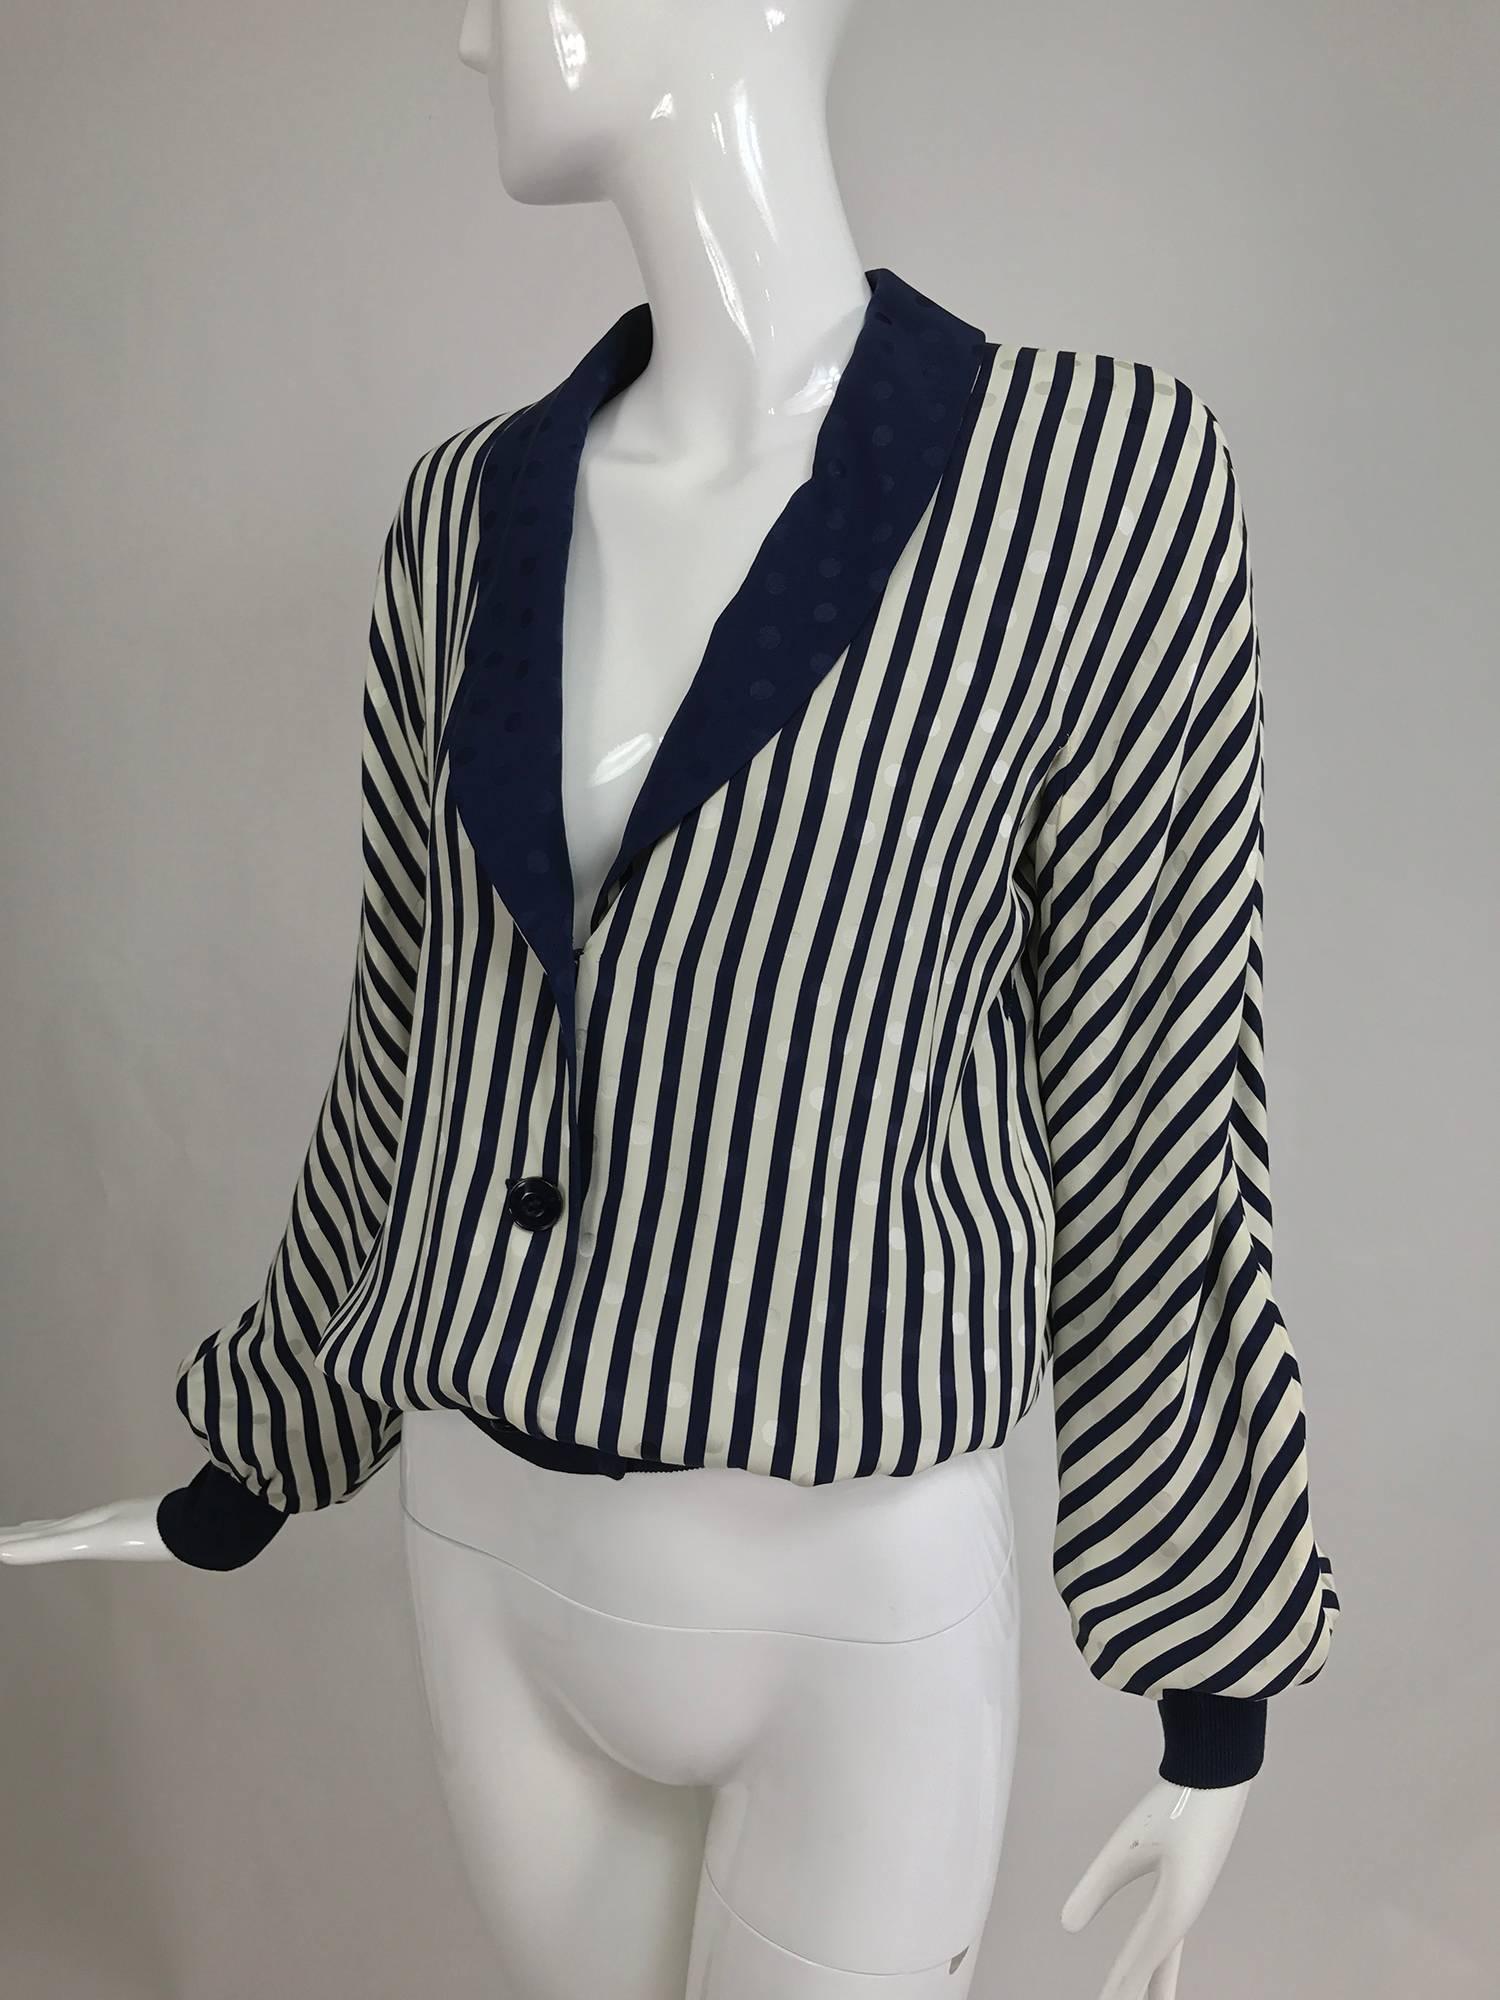 Valentino Boutique lightweight navy and white figured silk bomber jacket from the 1990s...Shawl collar jacket closes at the front with four buttons, long sleeves have knitted navy cuffs as does the jacket hem...Fully lined in navy figured